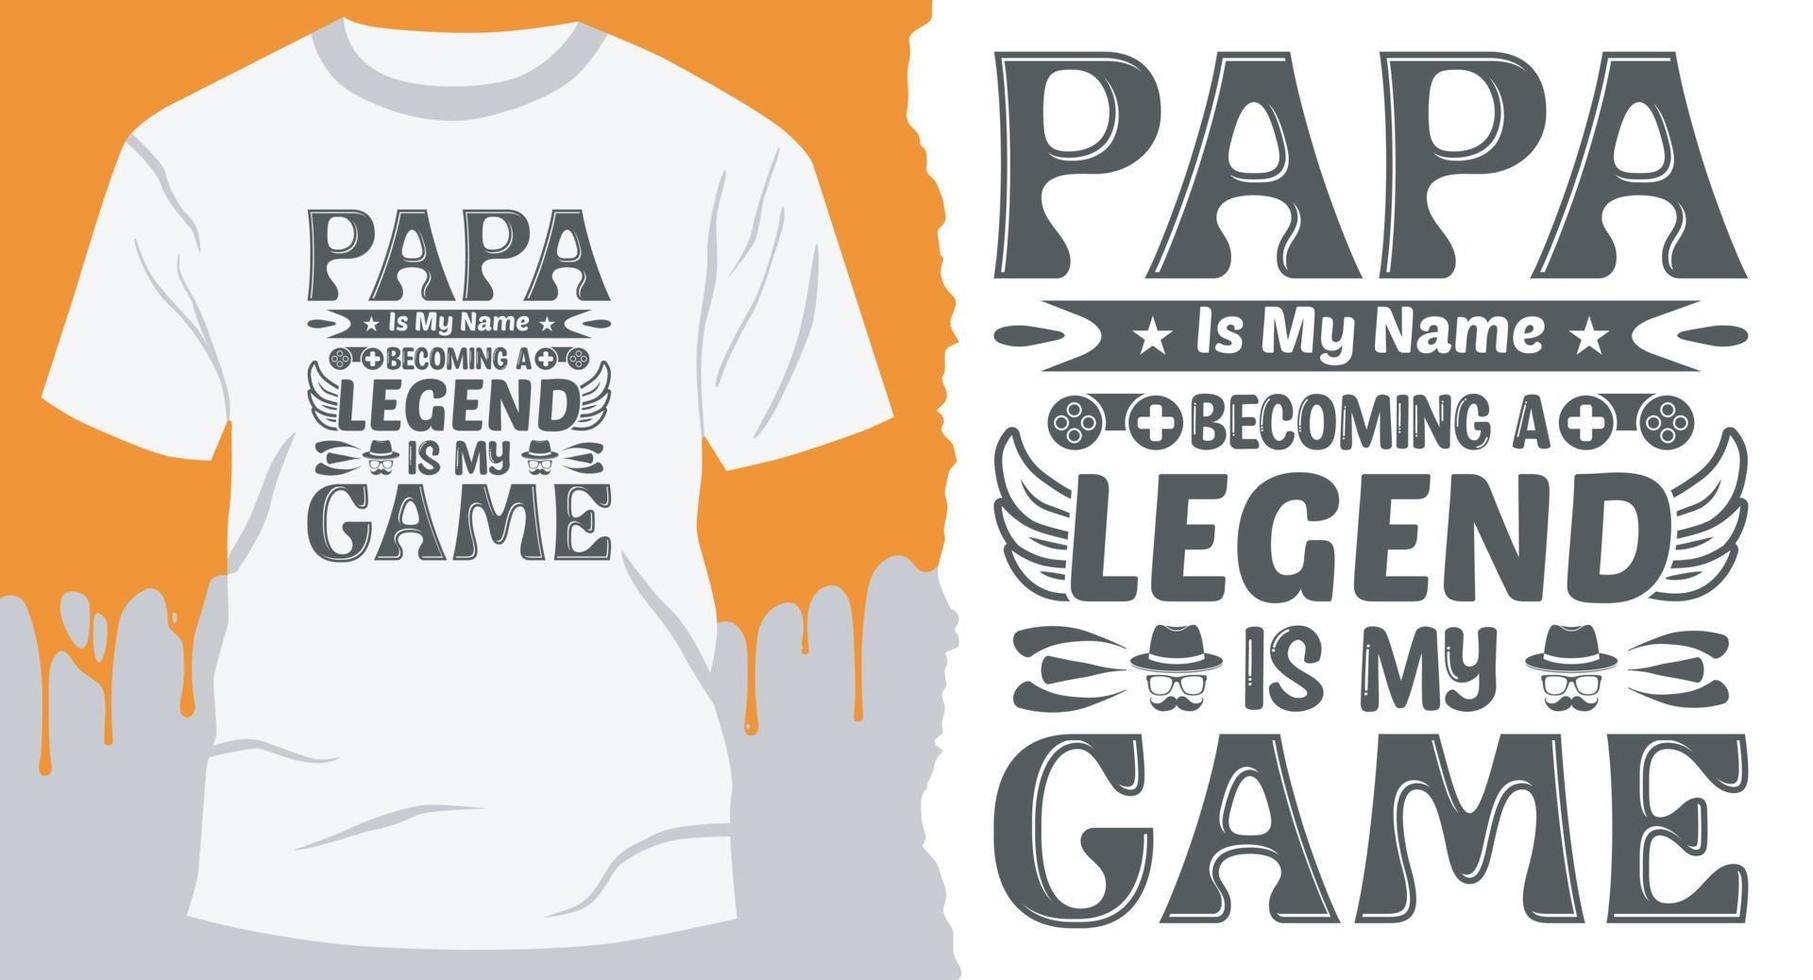 Papa Is My Name Becoming A Legend Is My Game. Dad T-Shirt Design Vector for Father's Day